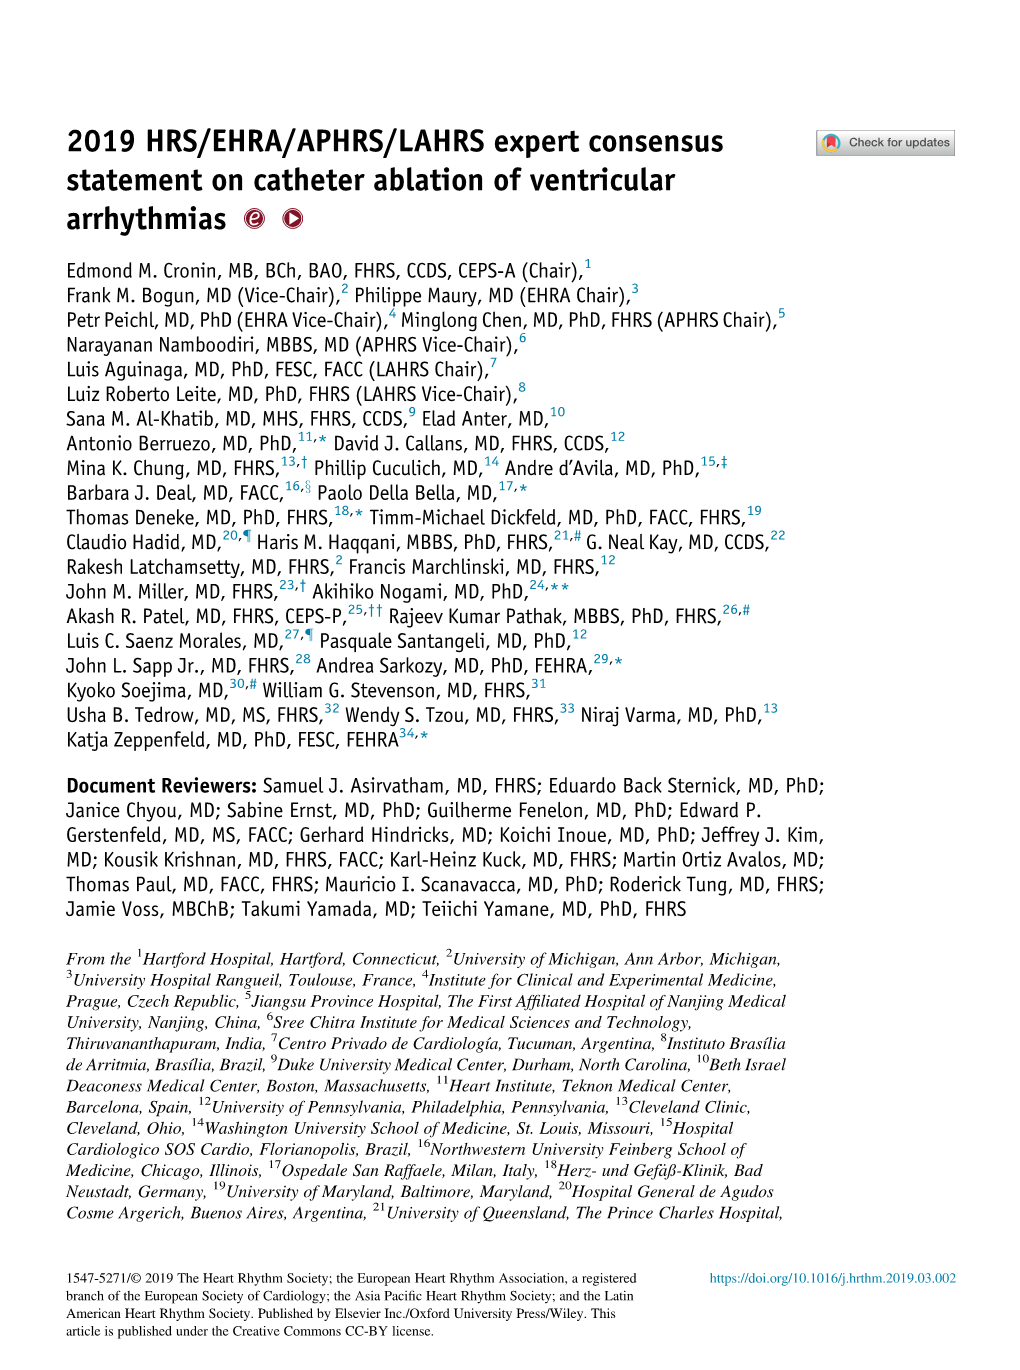 2019 HRS/EHRA/APHRS/LAHRS Expert Consensus Statement on Catheter Ablation of Ventricular Arrhythmias